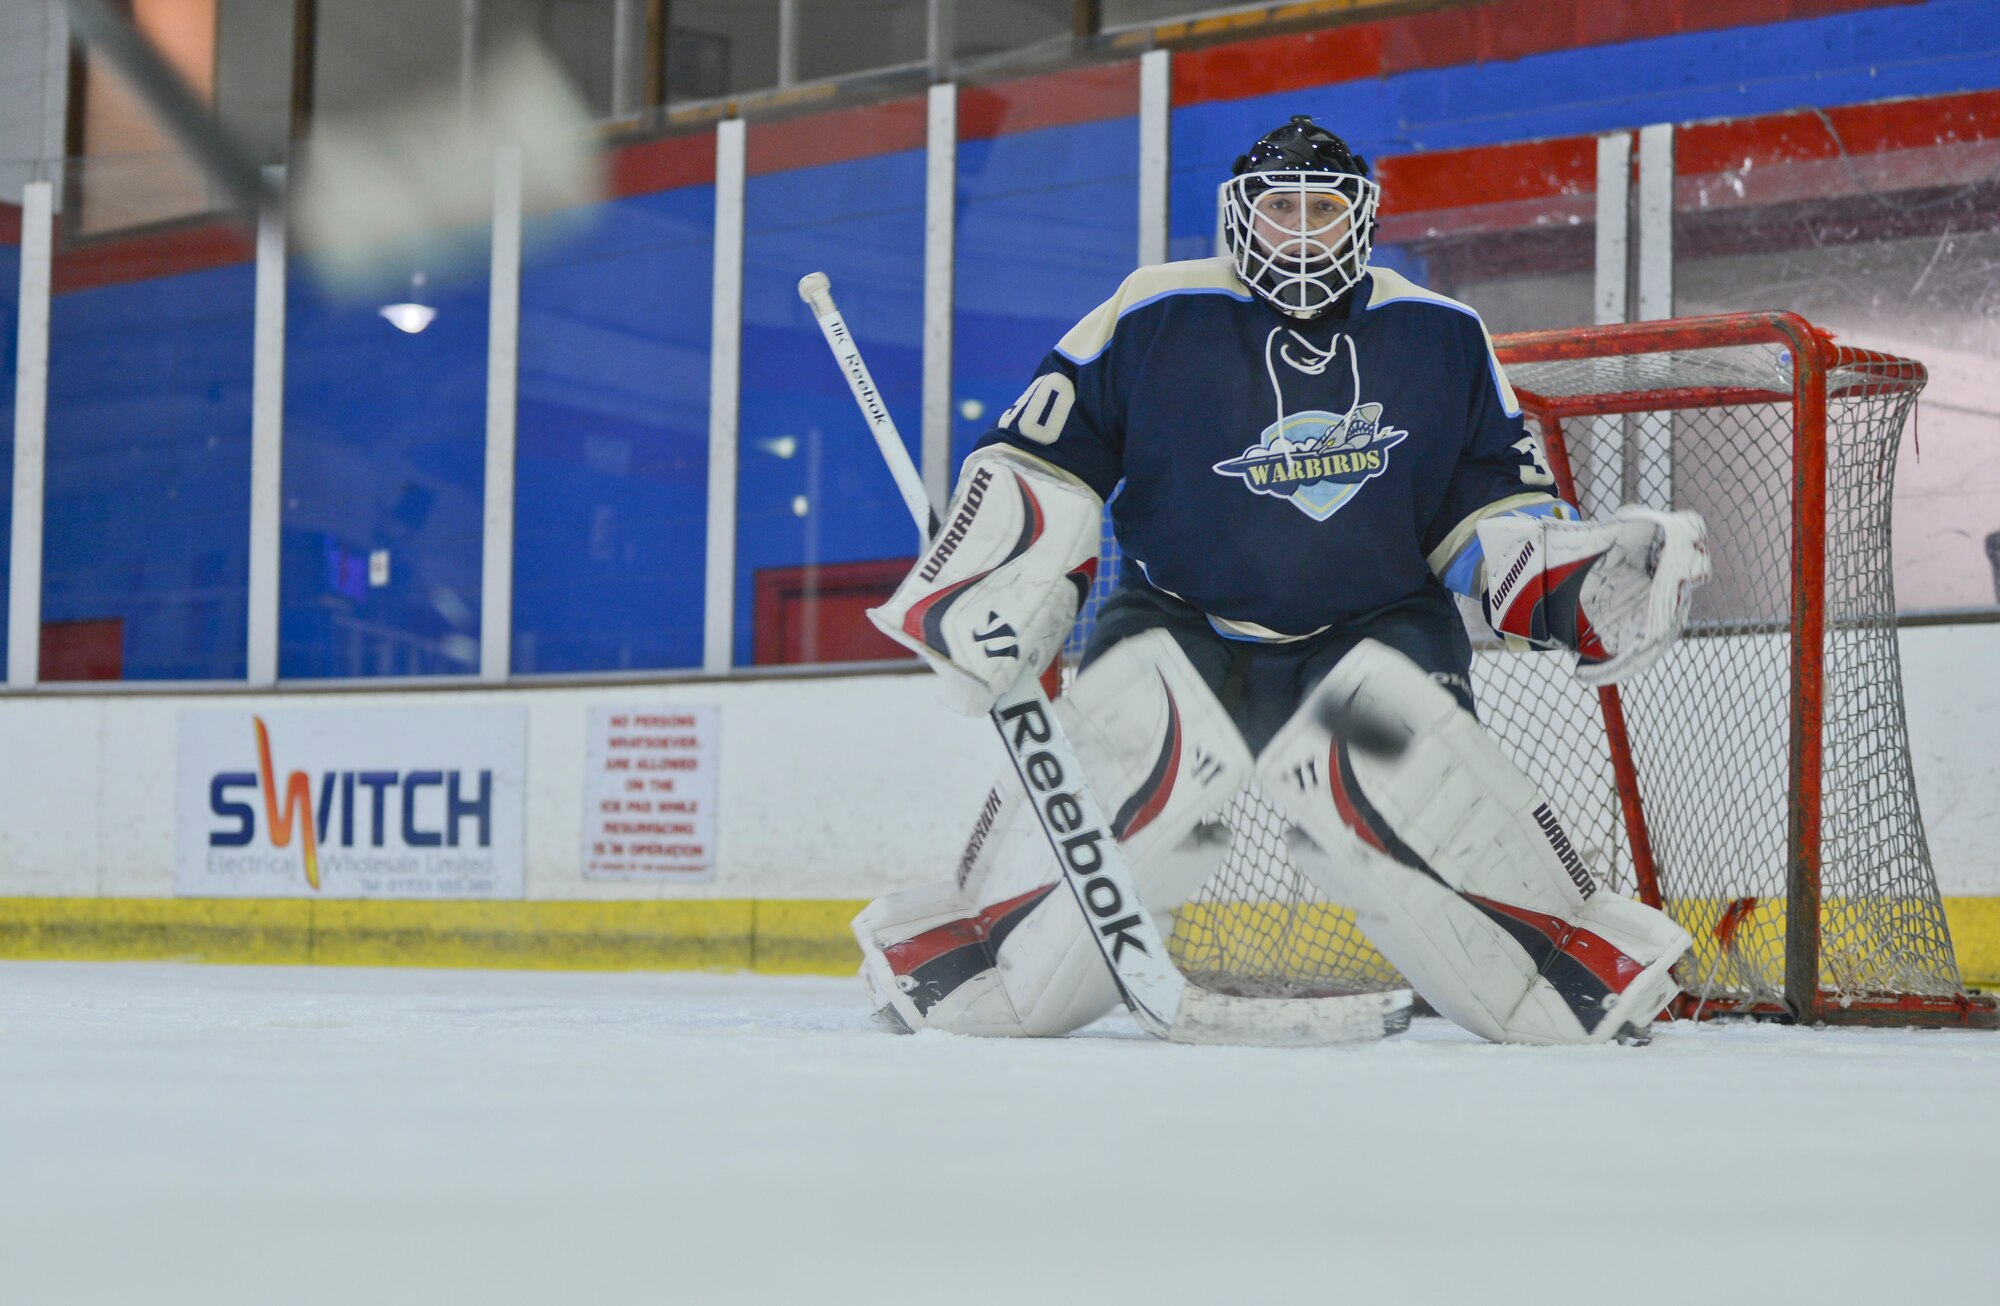 PETERBOROUGH, England - Master Sgt. Steven Kellerman, U.K. Warbirds goalie and member of the 48th Operations Support Squadron, moves to block a shot during a practice session March 29, 2013. The U.K. Warbirds is the U.S. Air Force hockey team in the U.K. Kellerman hails from Buffalo, N.Y. (U.S. Air Force photo by Staff Sgt. Stephen Linch)